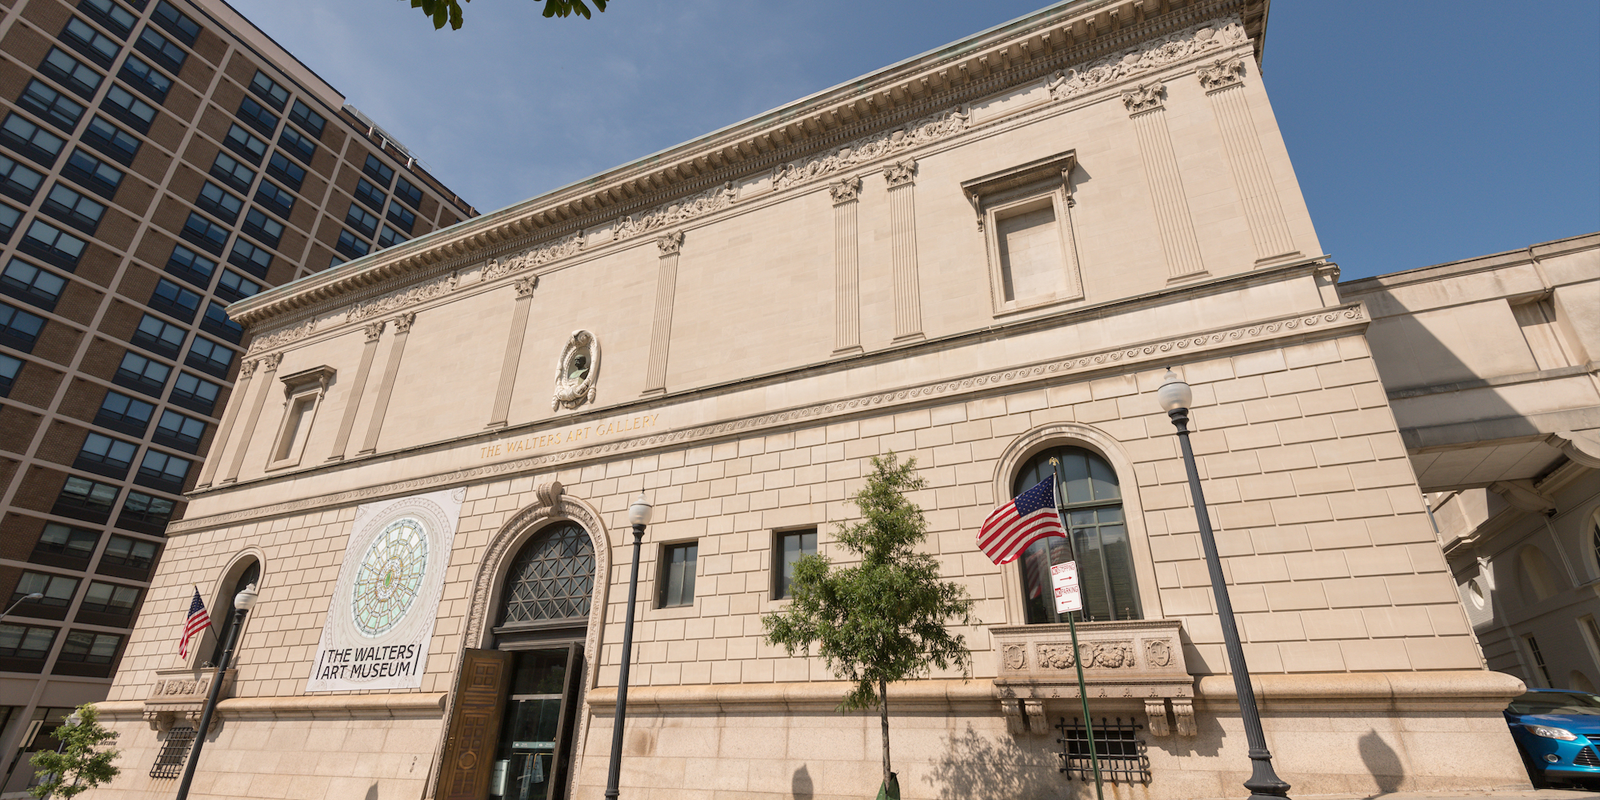 Workers union sues Walters Art Museum for violating the Maryland Public Information Act